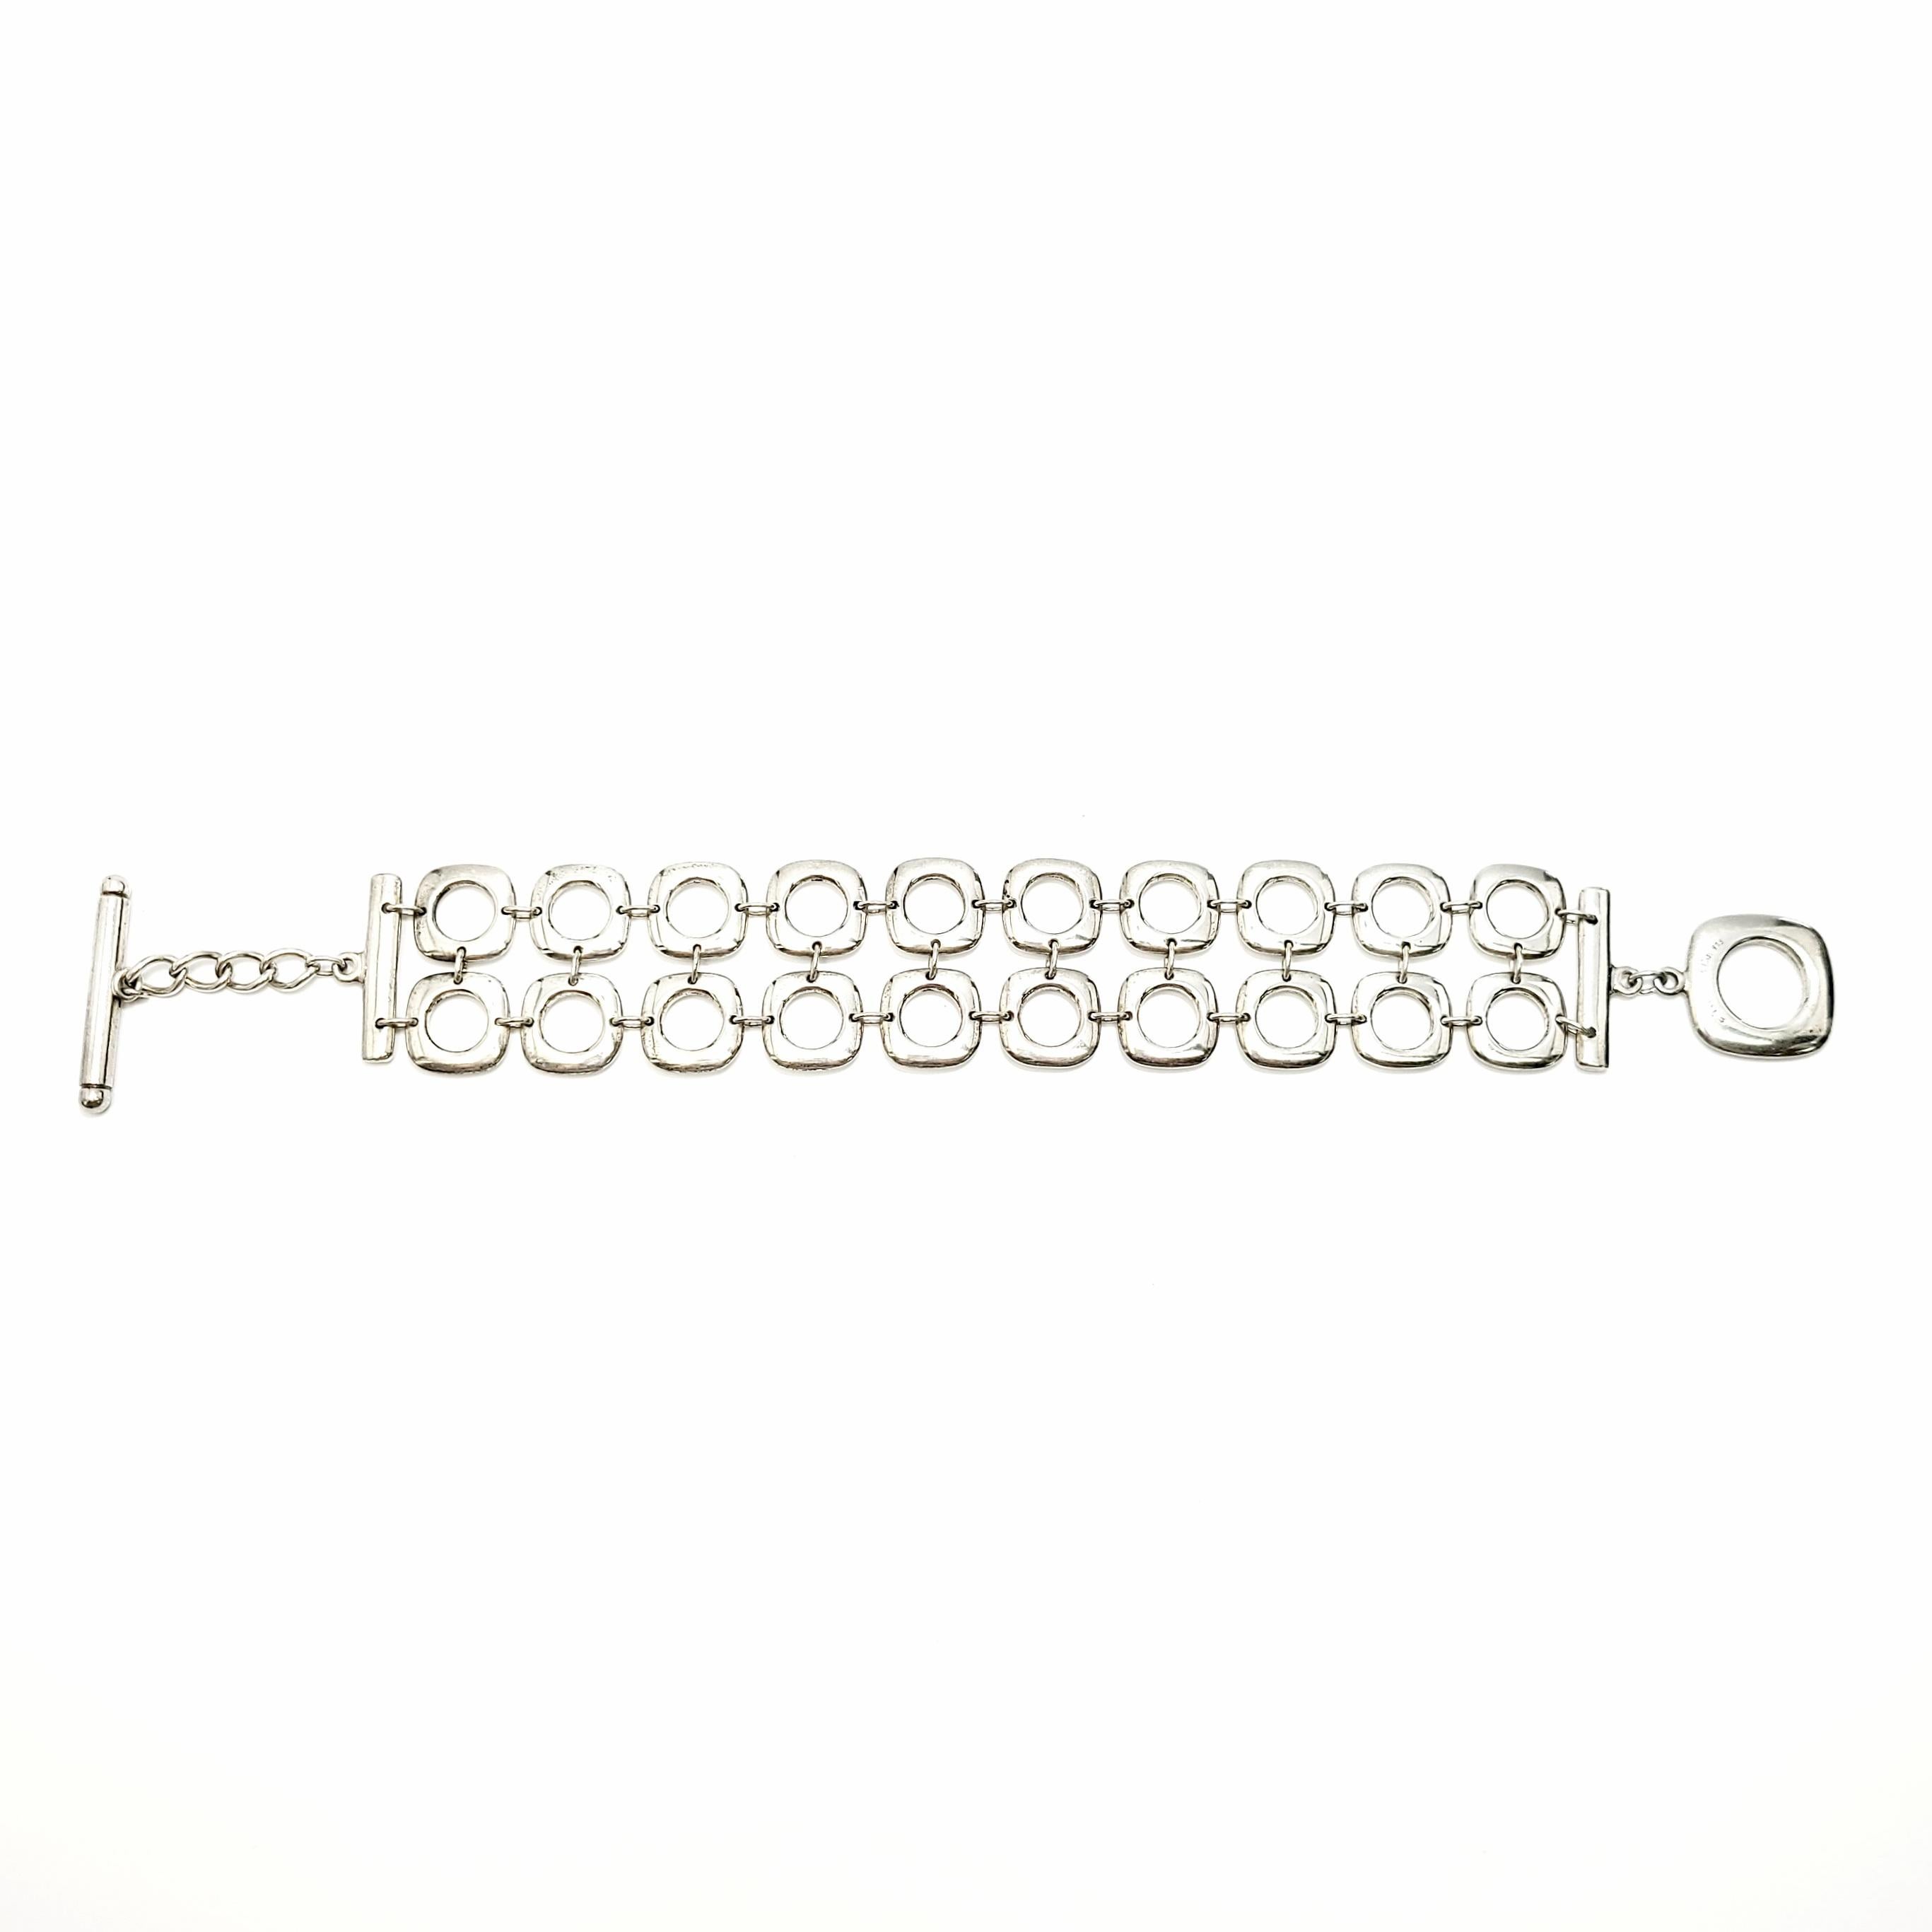 Tiffany & Co sterling silver double row square cushion link bracelet.

Authentic Tiffany bracelet featuring two rows of cushion square links with a toggle closure.

Measures approx 8 1/4